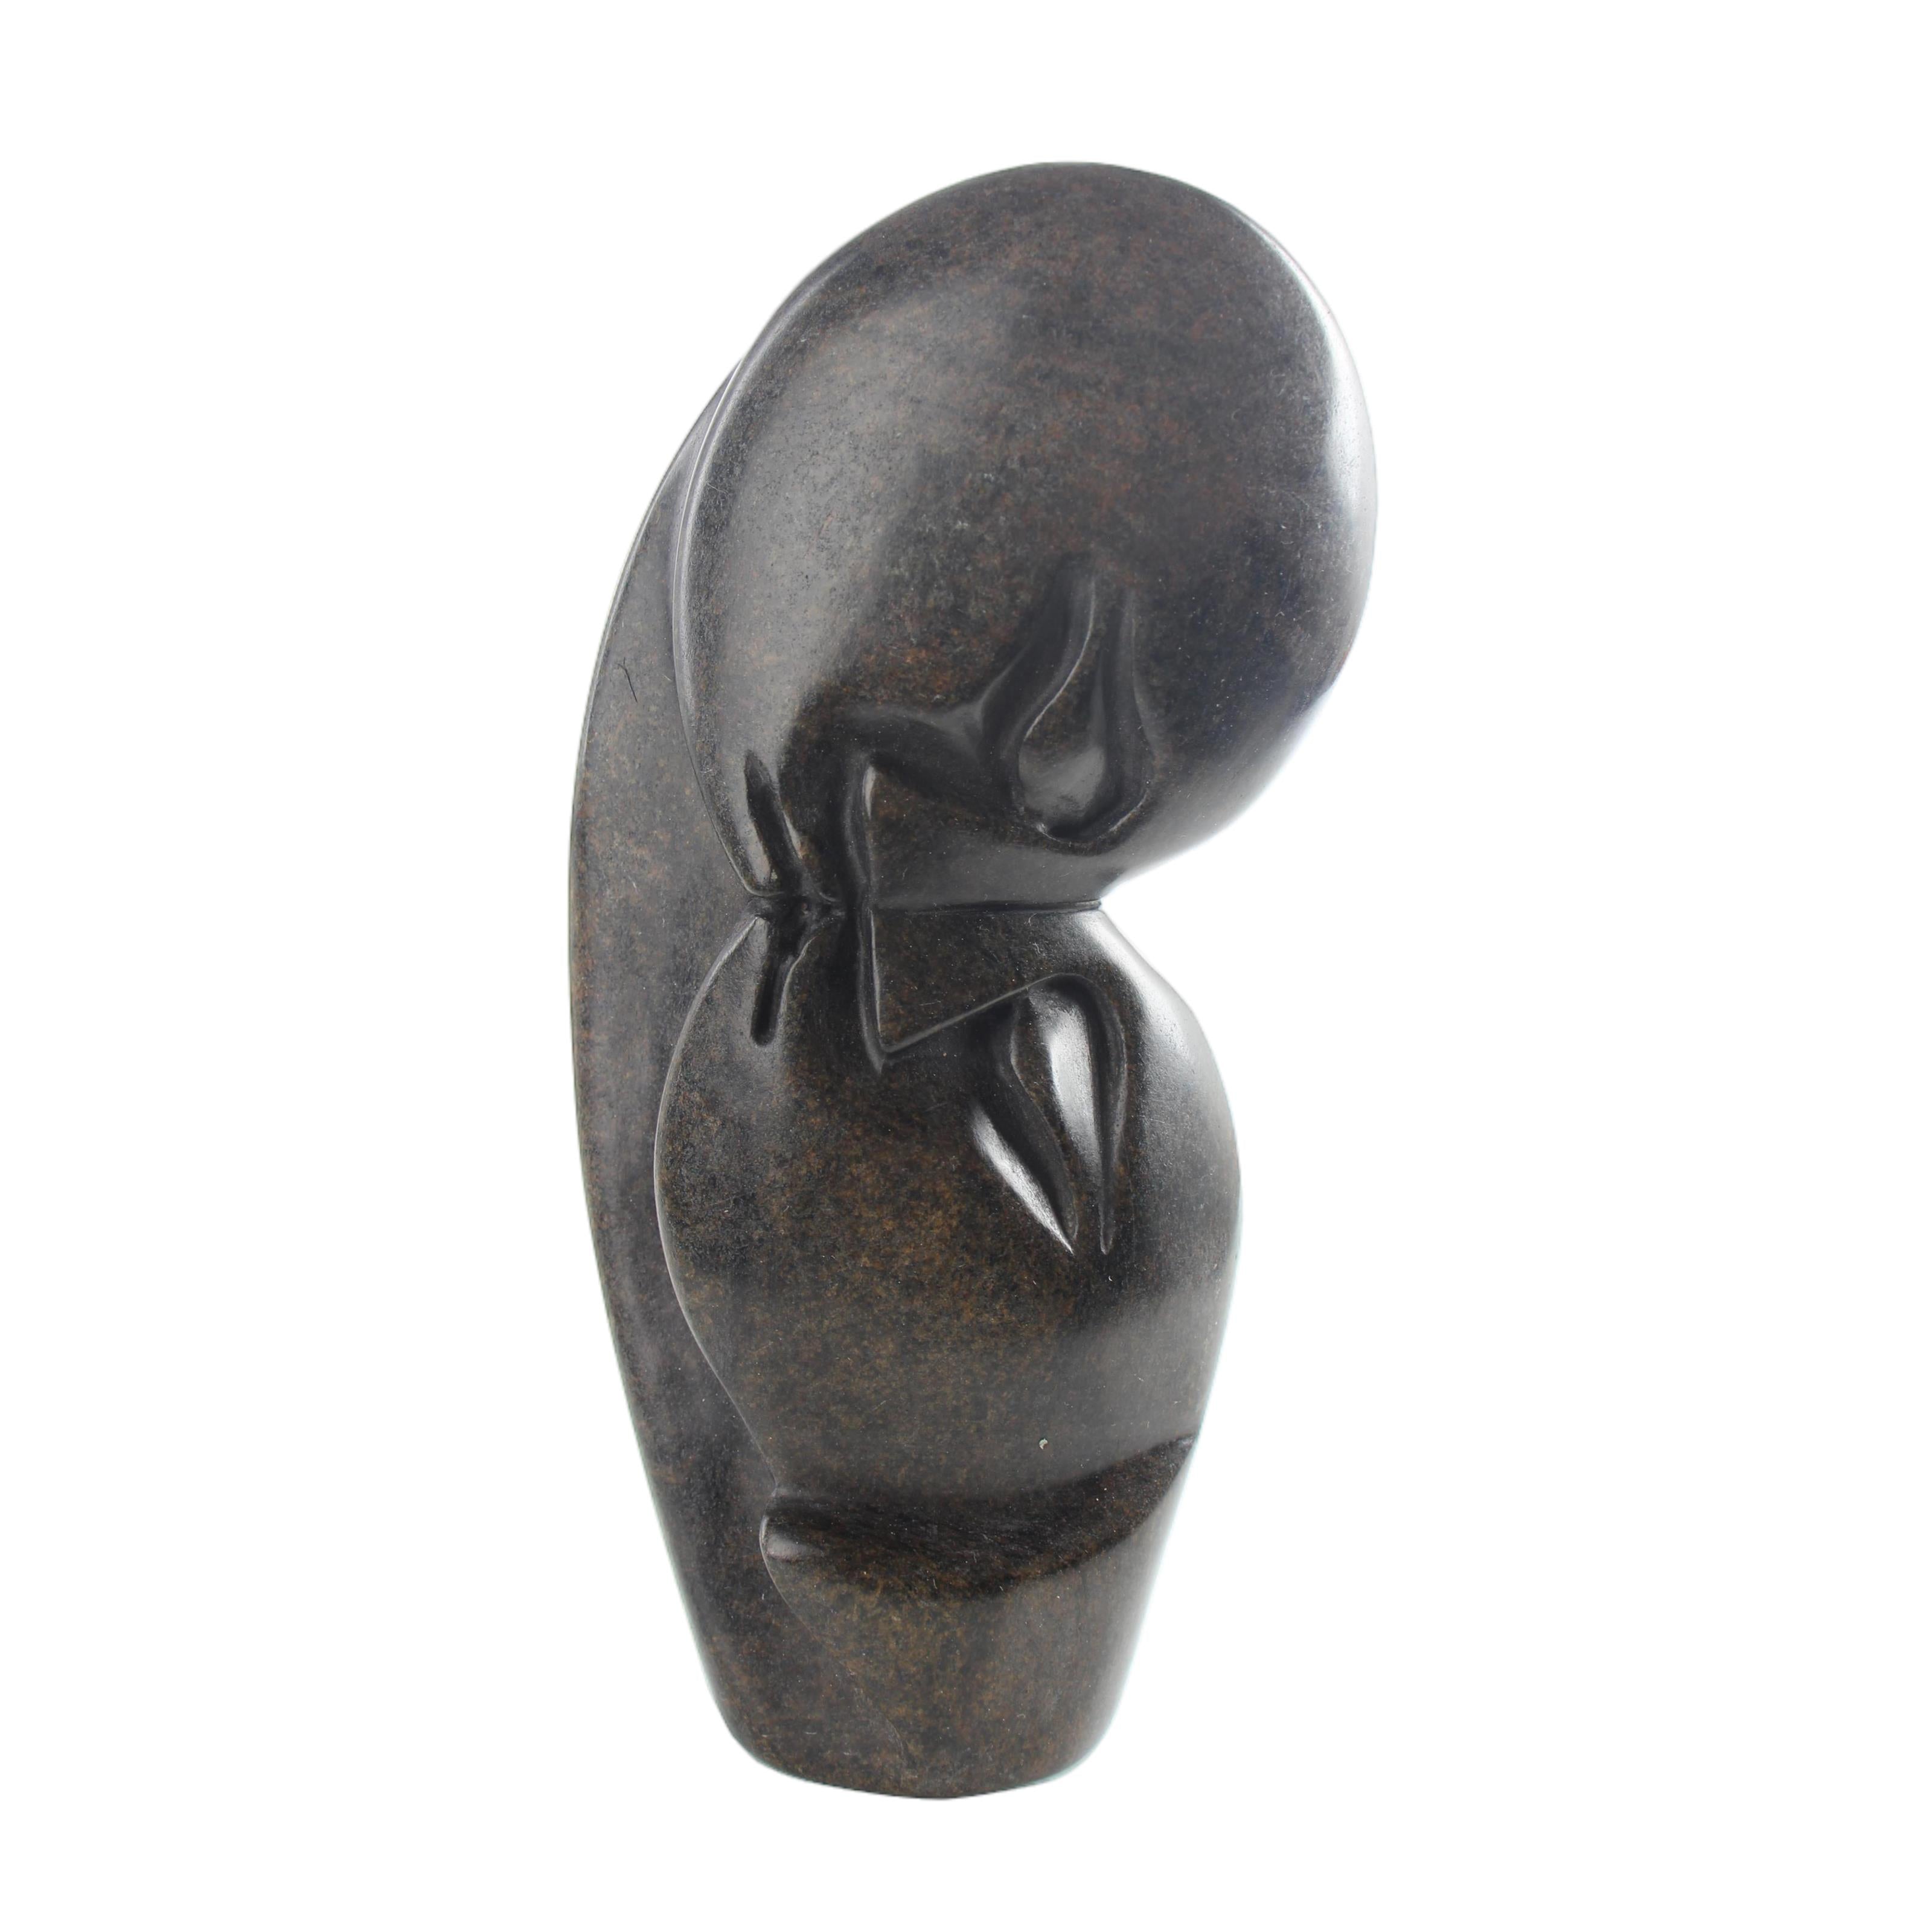 Shona Tribe Serpentine Stone Lovers ~7.9" Tall - Lovers